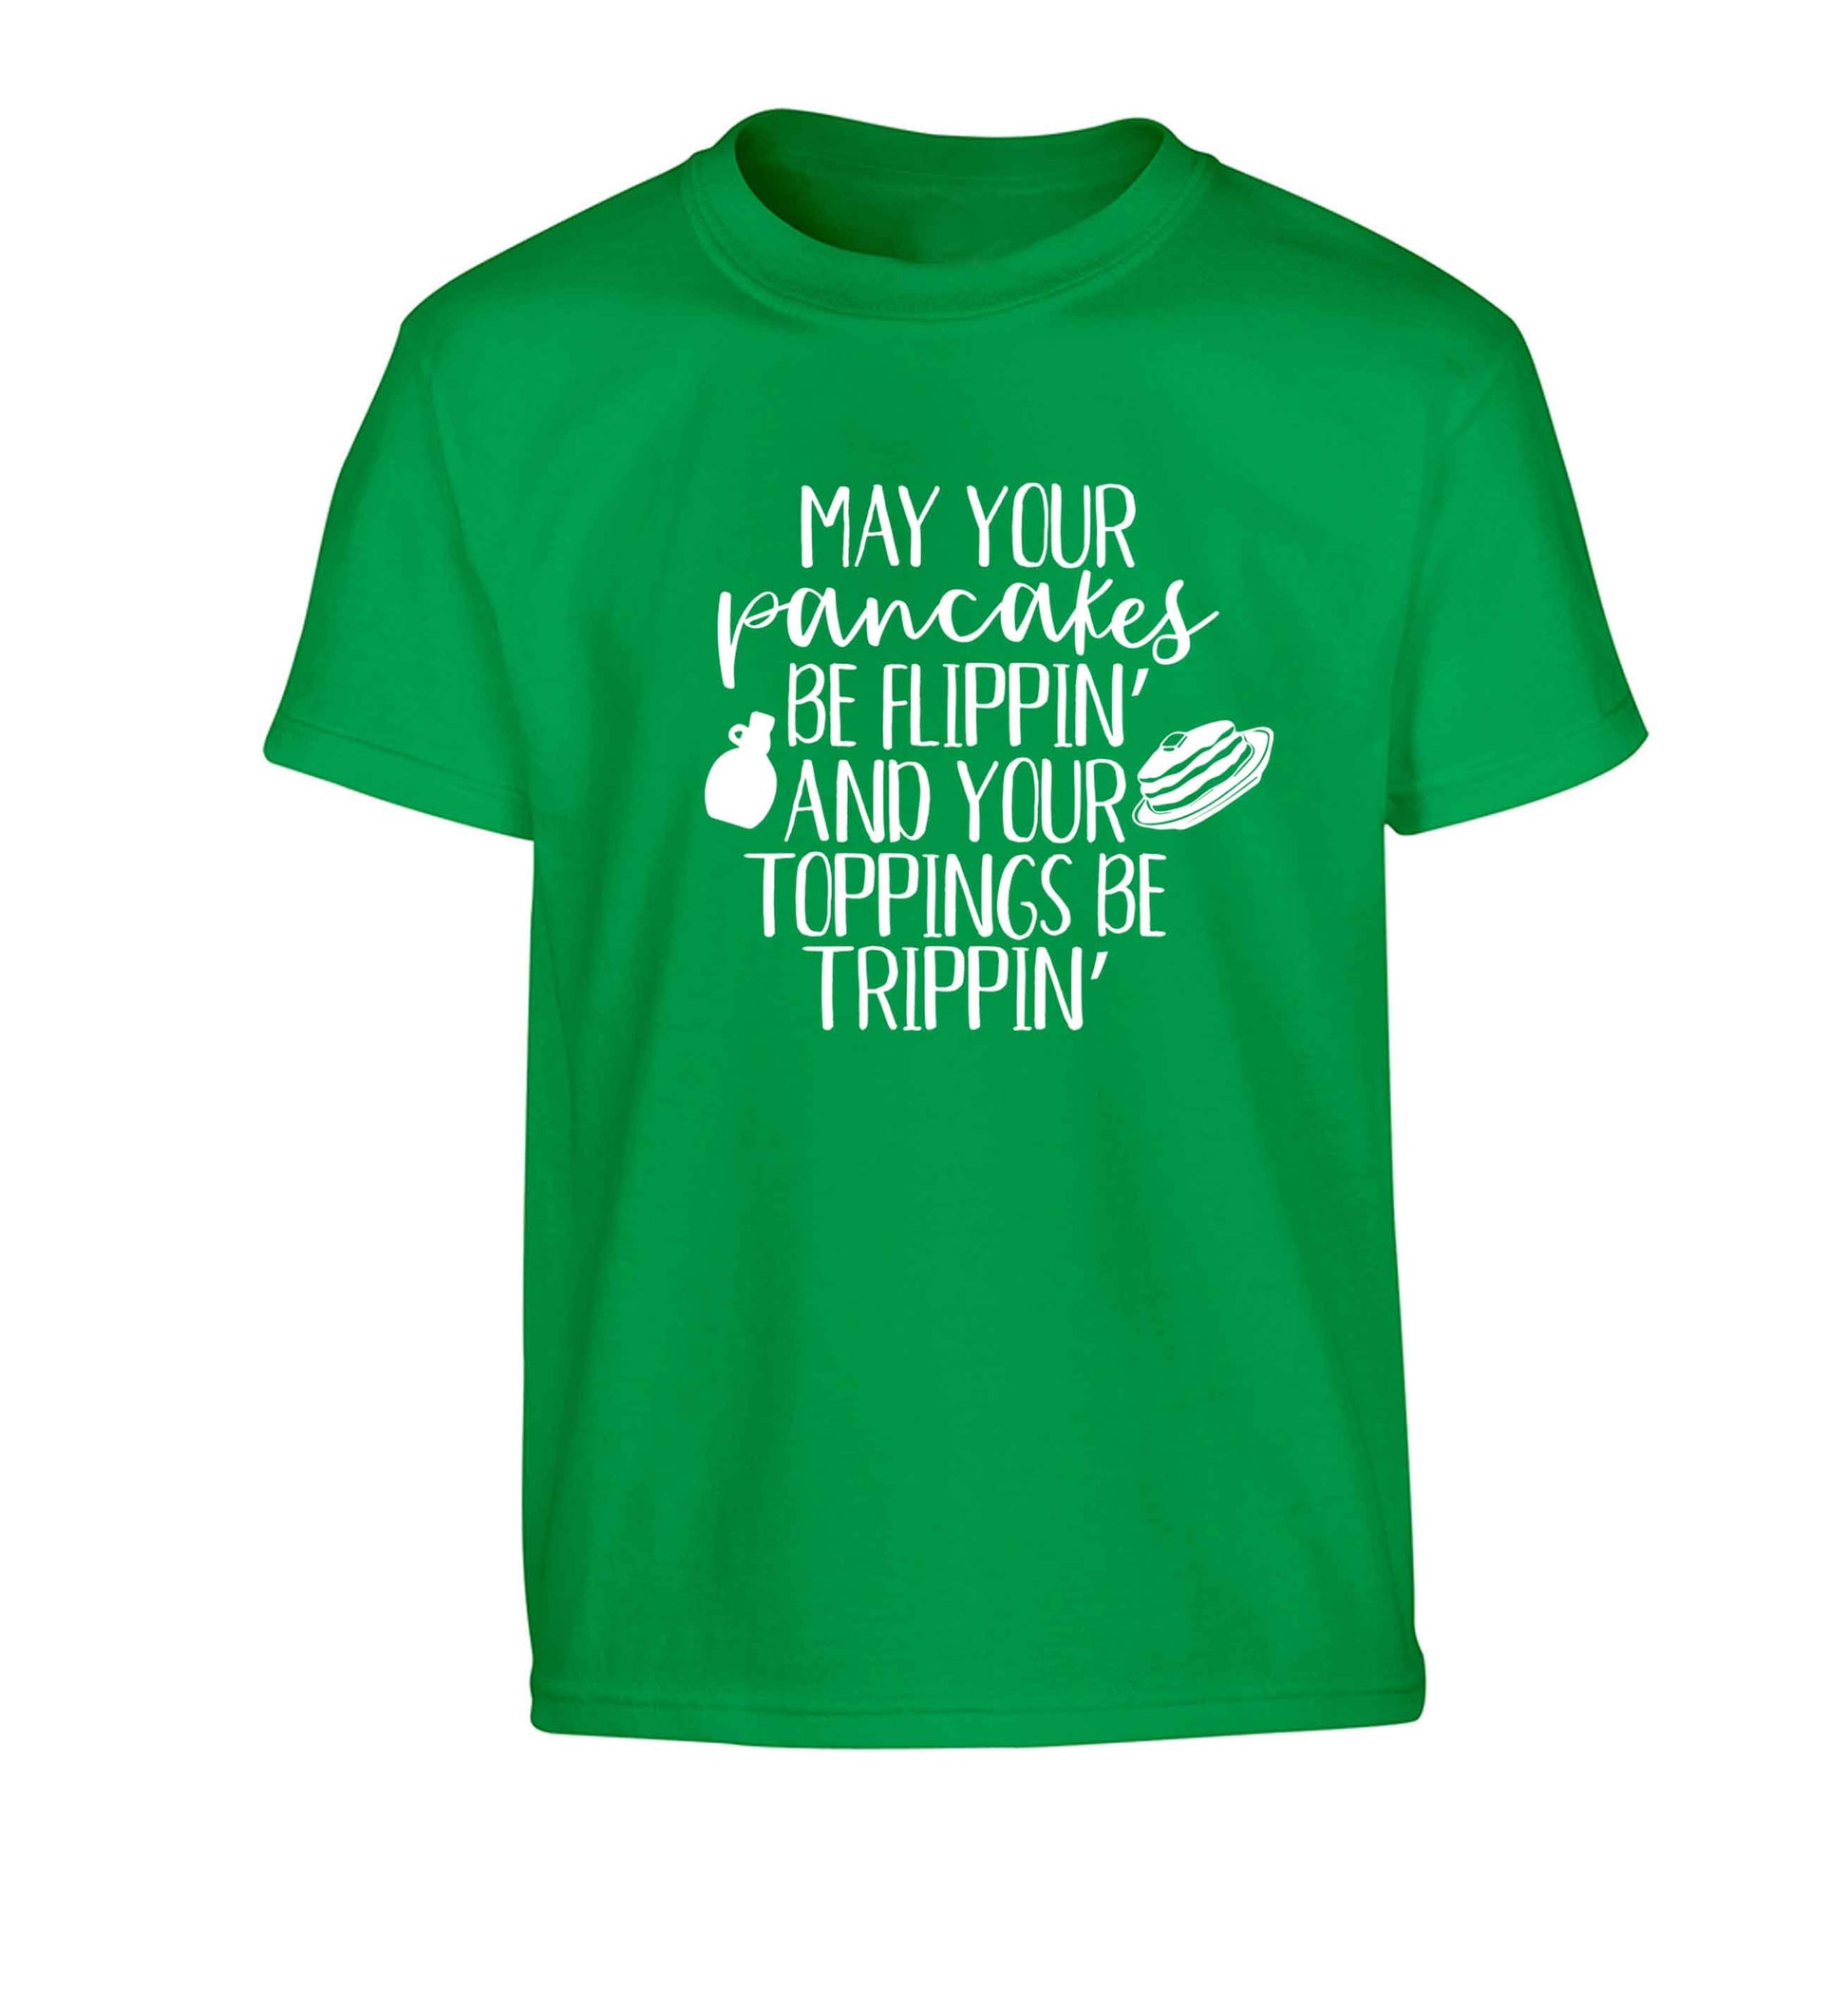 May your pancakes be flippin' and your toppings be trippin' Children's green Tshirt 12-13 Years